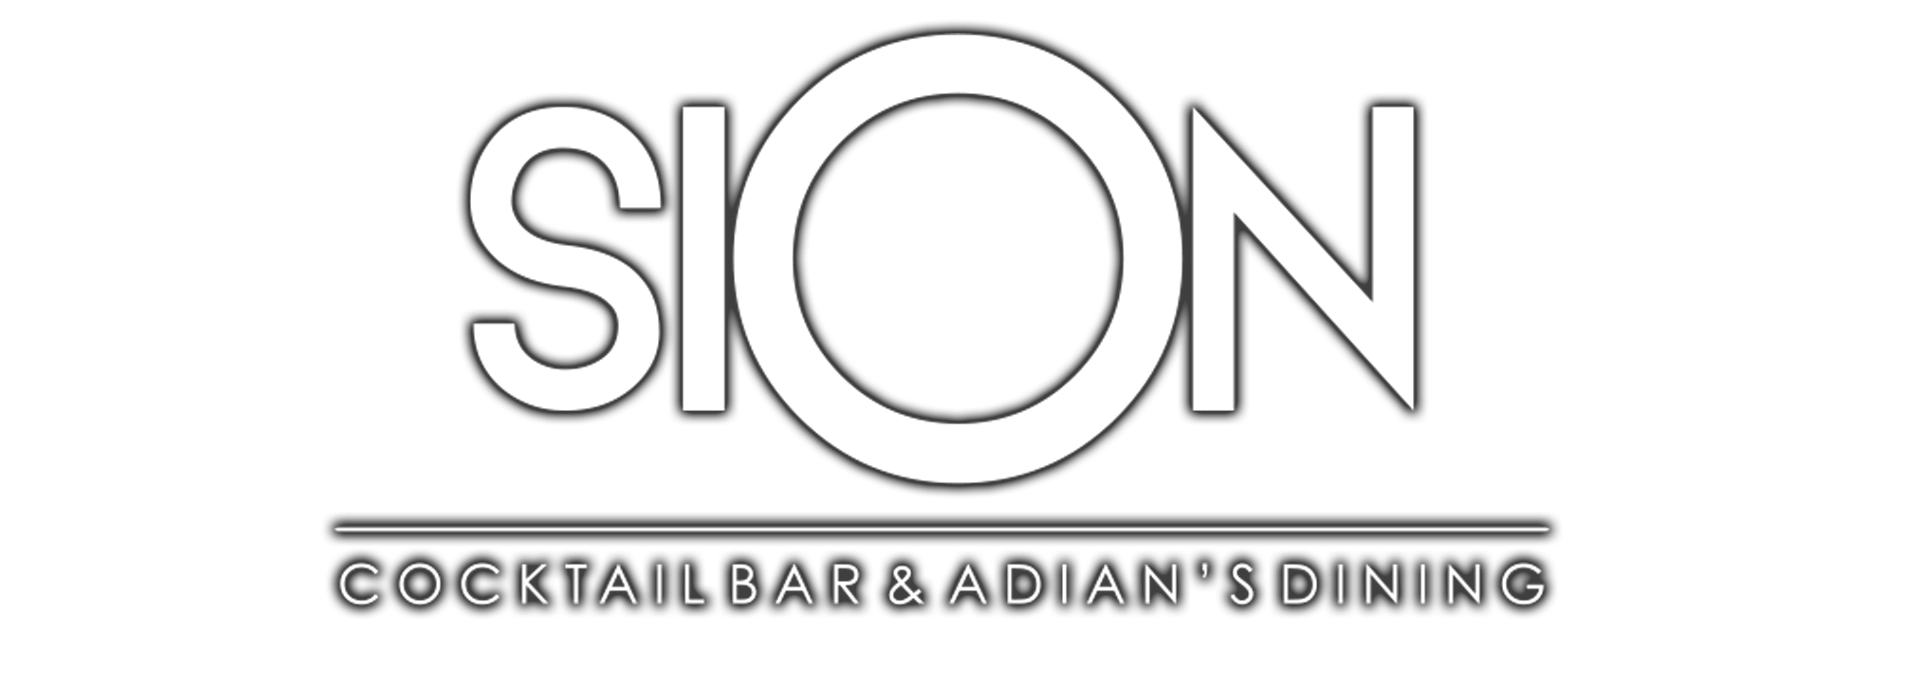 Sion Logo - British Caribbean | Sion Cocktail Bar | Adian's Dining